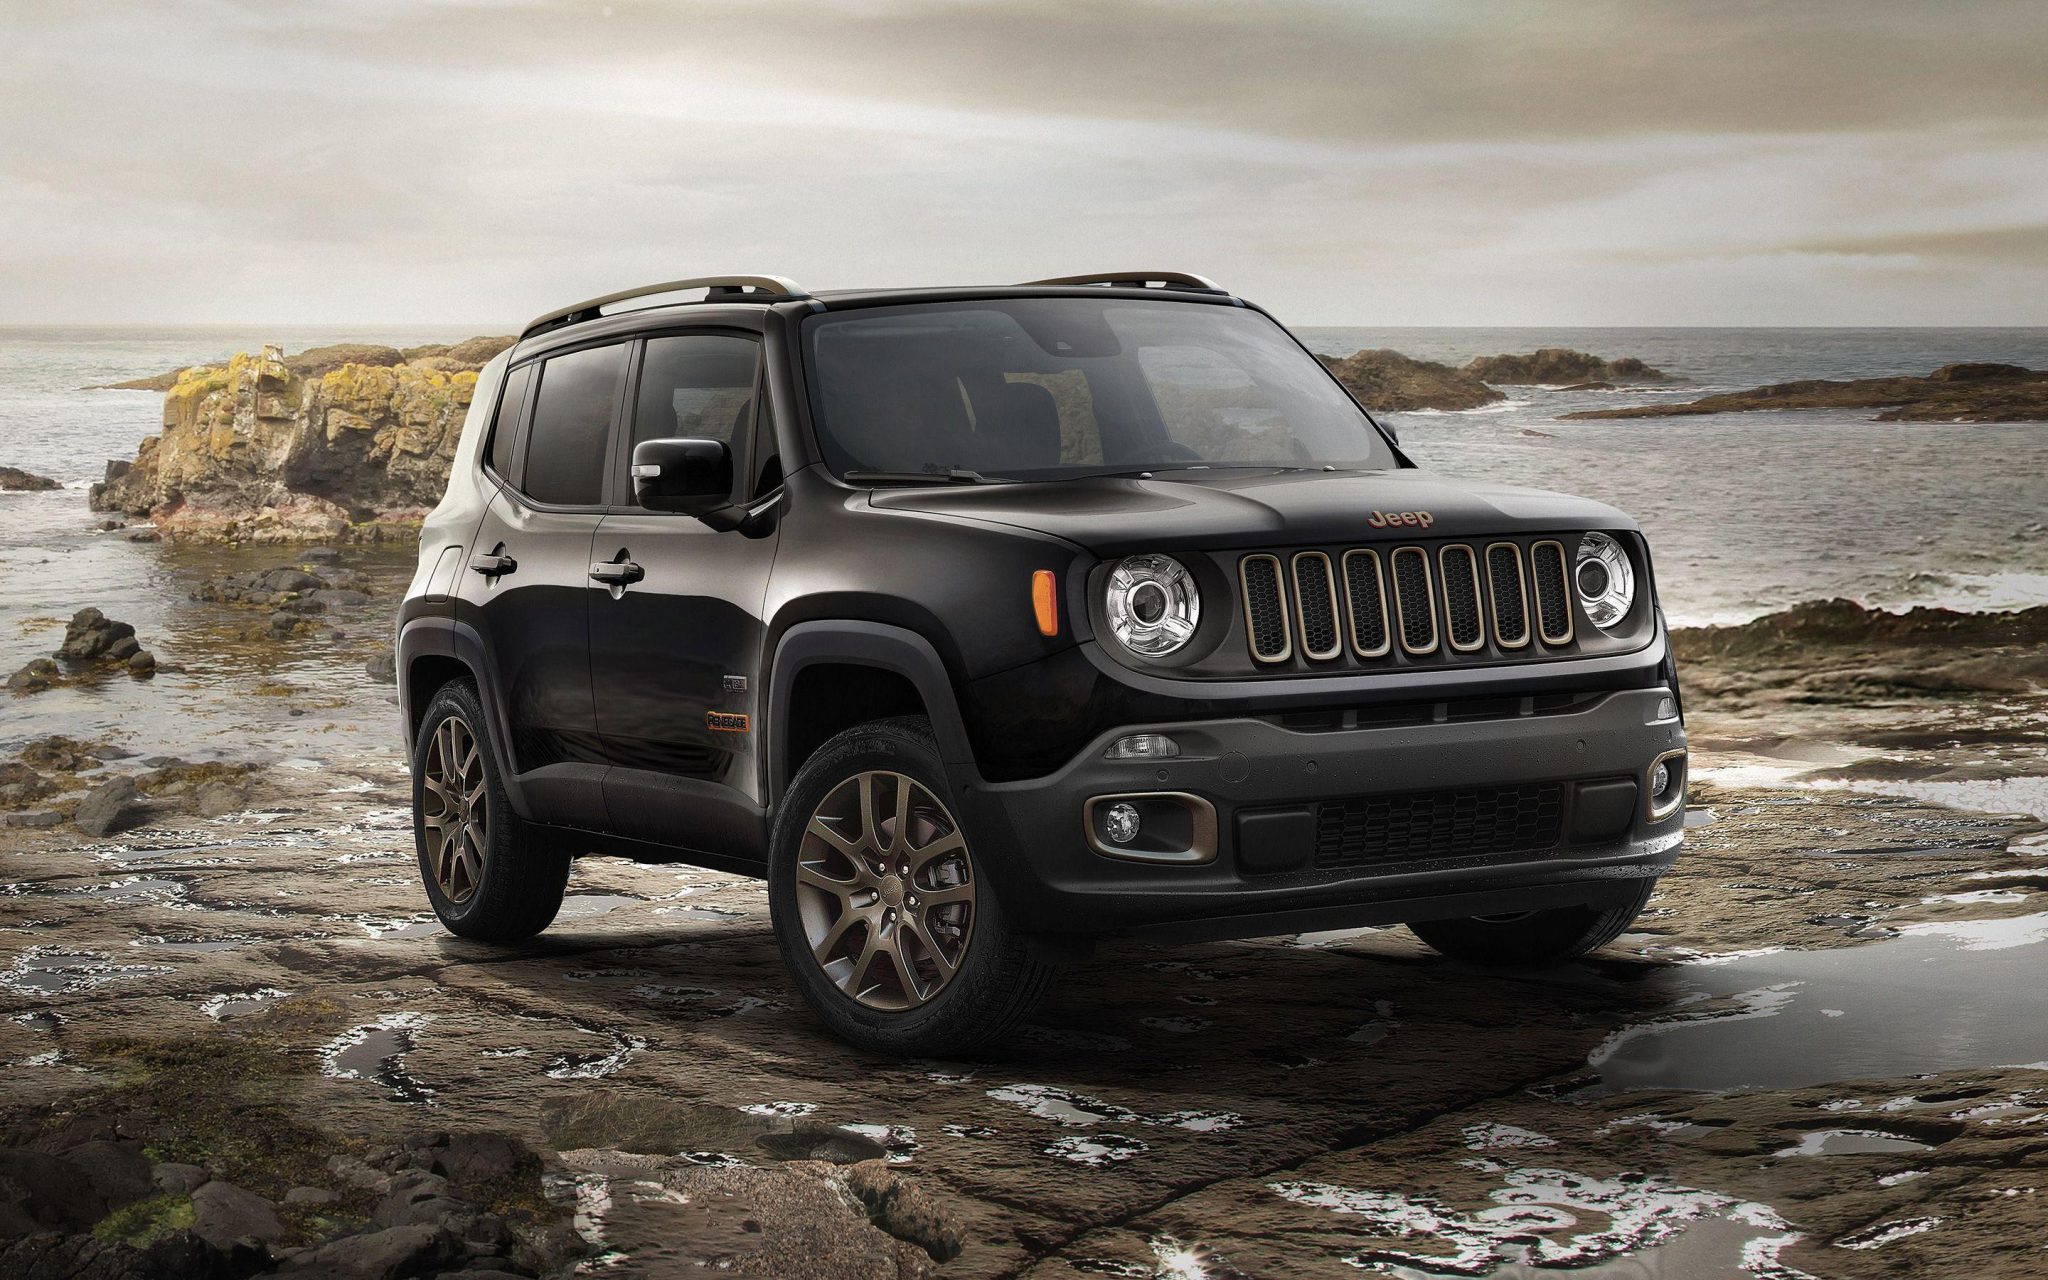 https://www.goodcarbadcar.net/wp-content/uploads/2014/03/JEEP-RENEGADE-scaled.jpeg